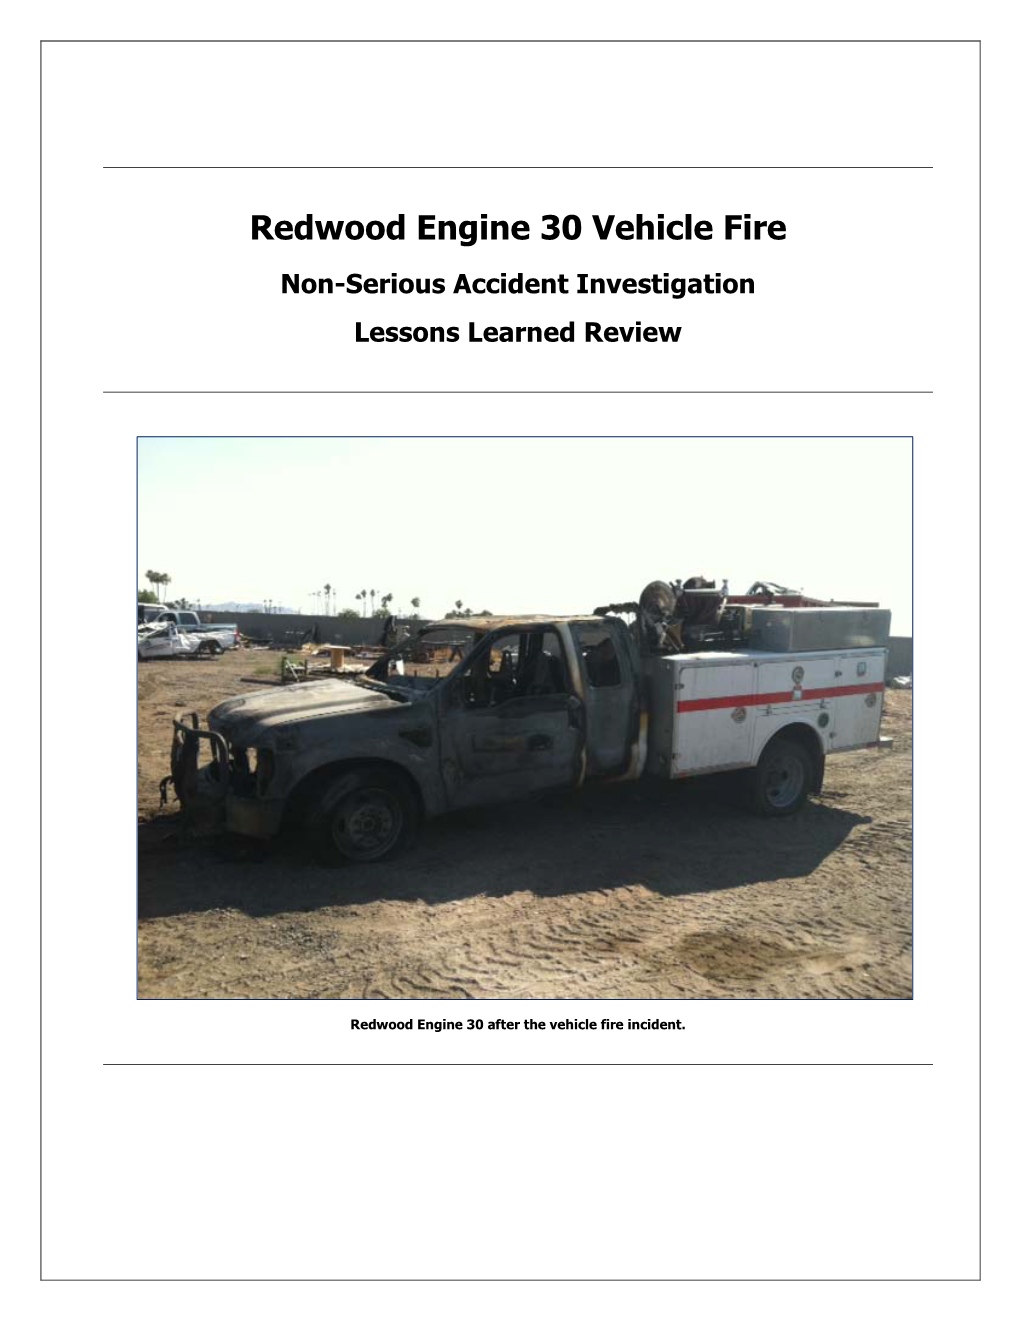 Redwood Engine 30 Vehicle Fire Non-Serious Accident Investigation Lessons Learned Review